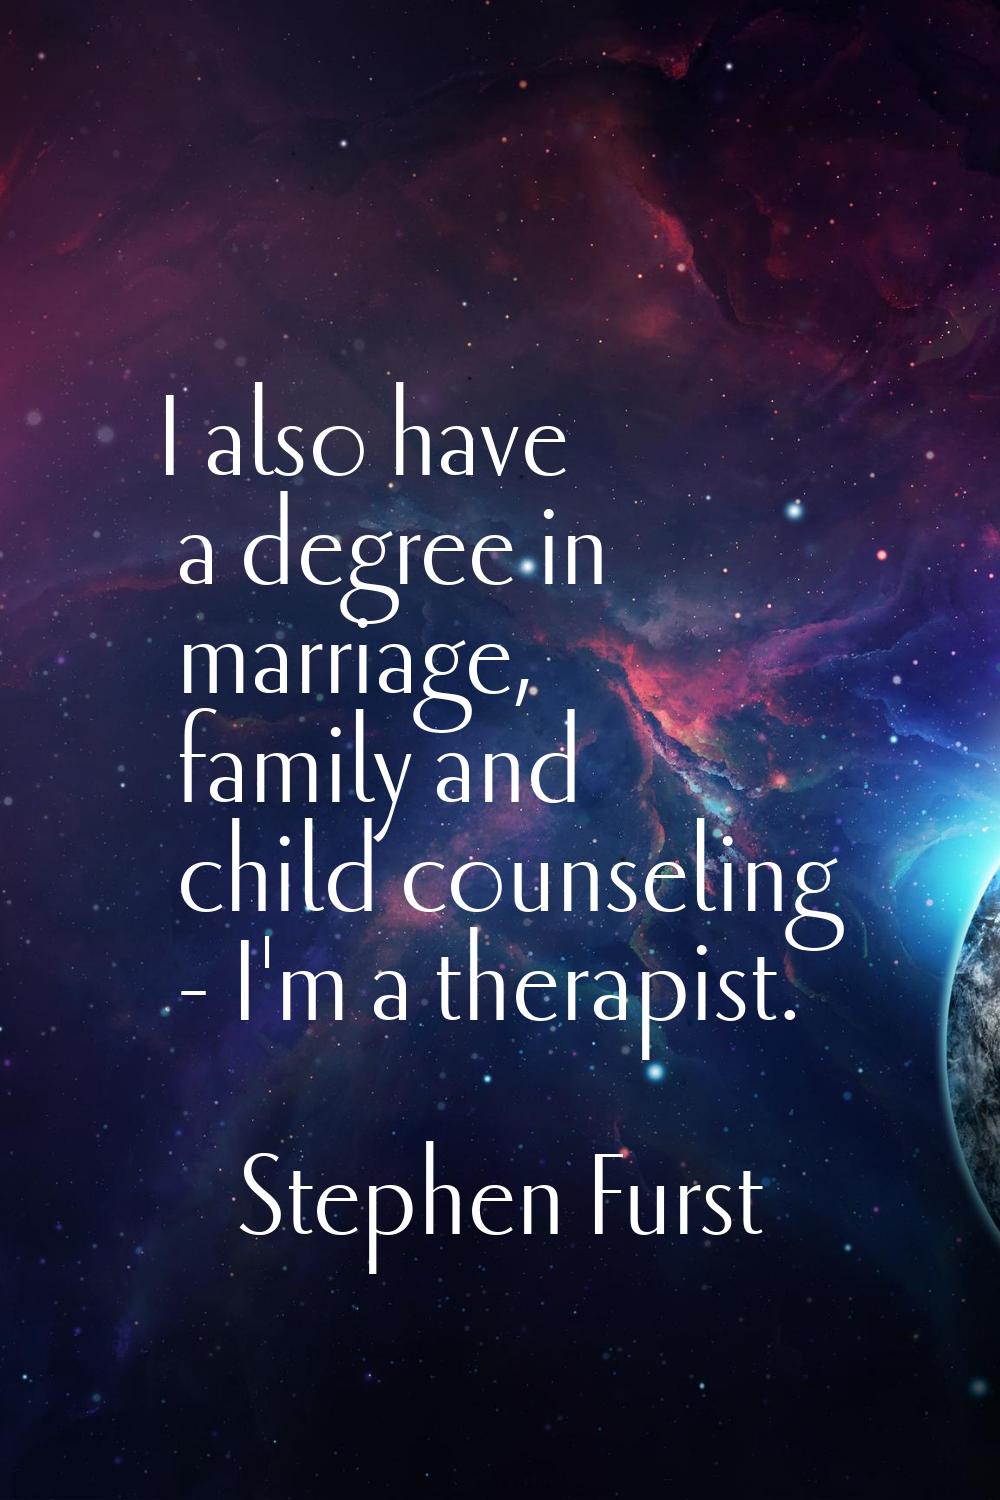 I also have a degree in marriage, family and child counseling - I'm a therapist.